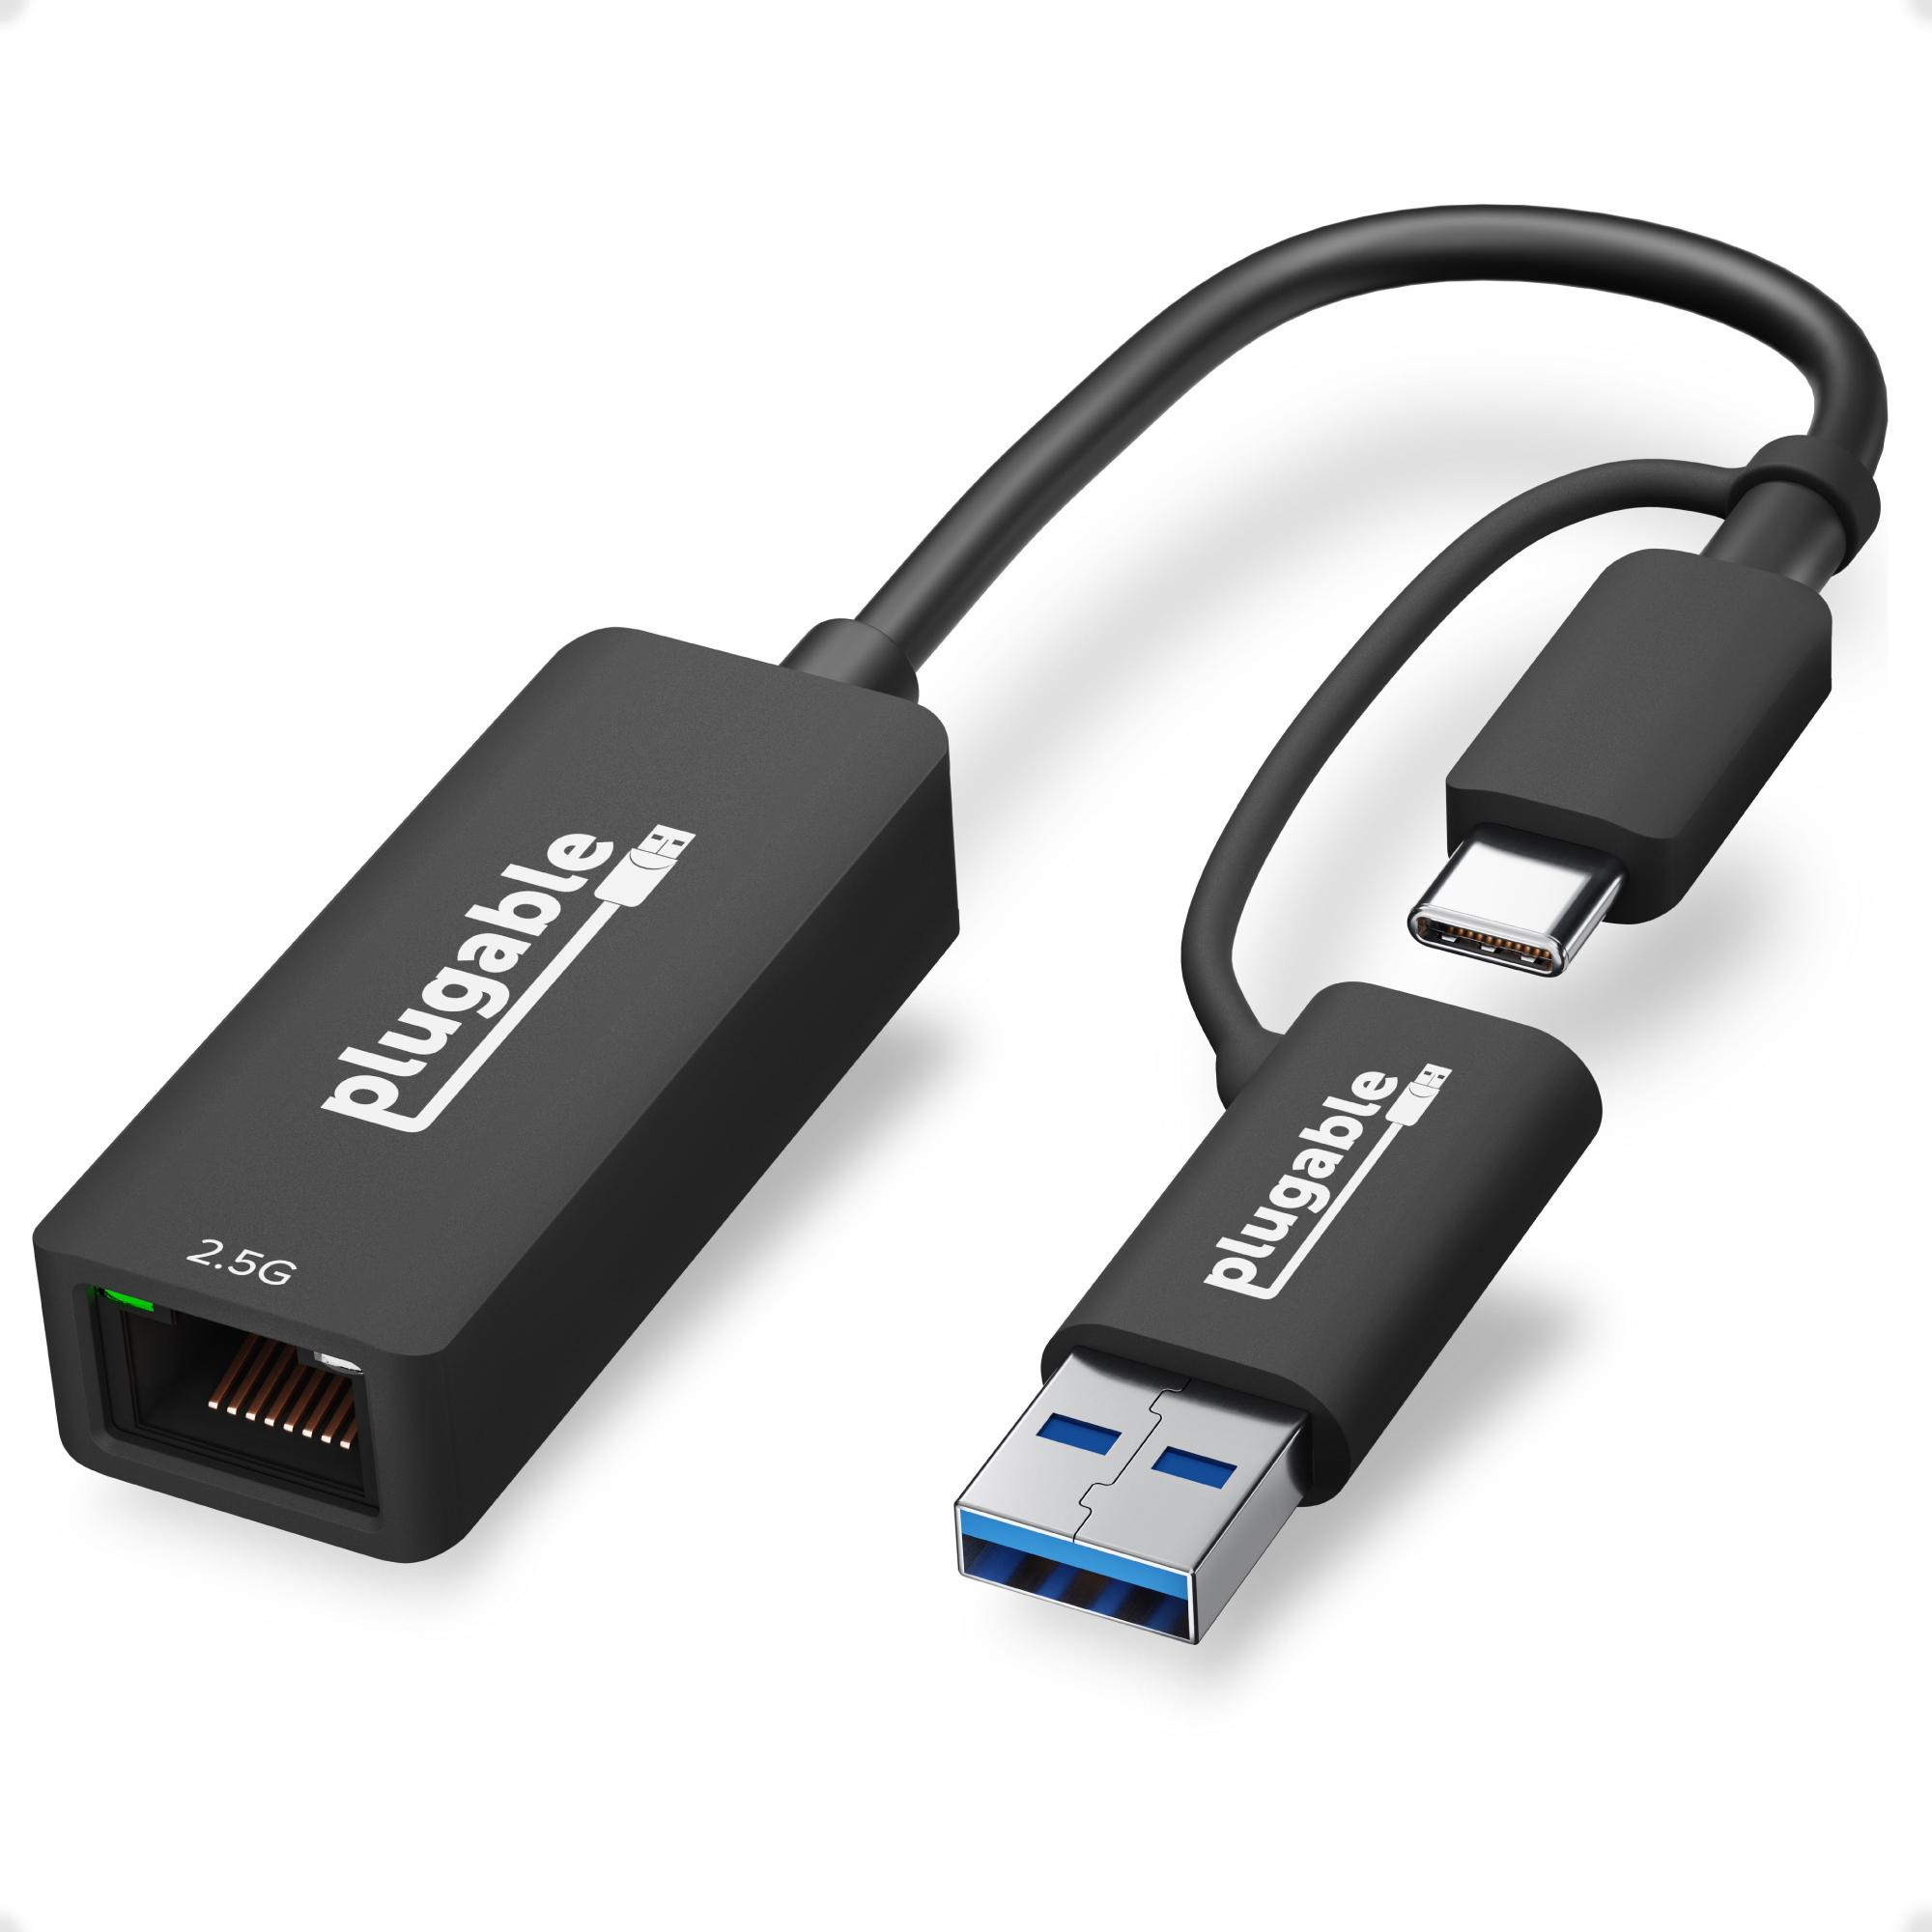 Photos - Network Card Plugable Technologies 2.5G USB C and USB to Ethernet Adapter, 2-in-1 A USB